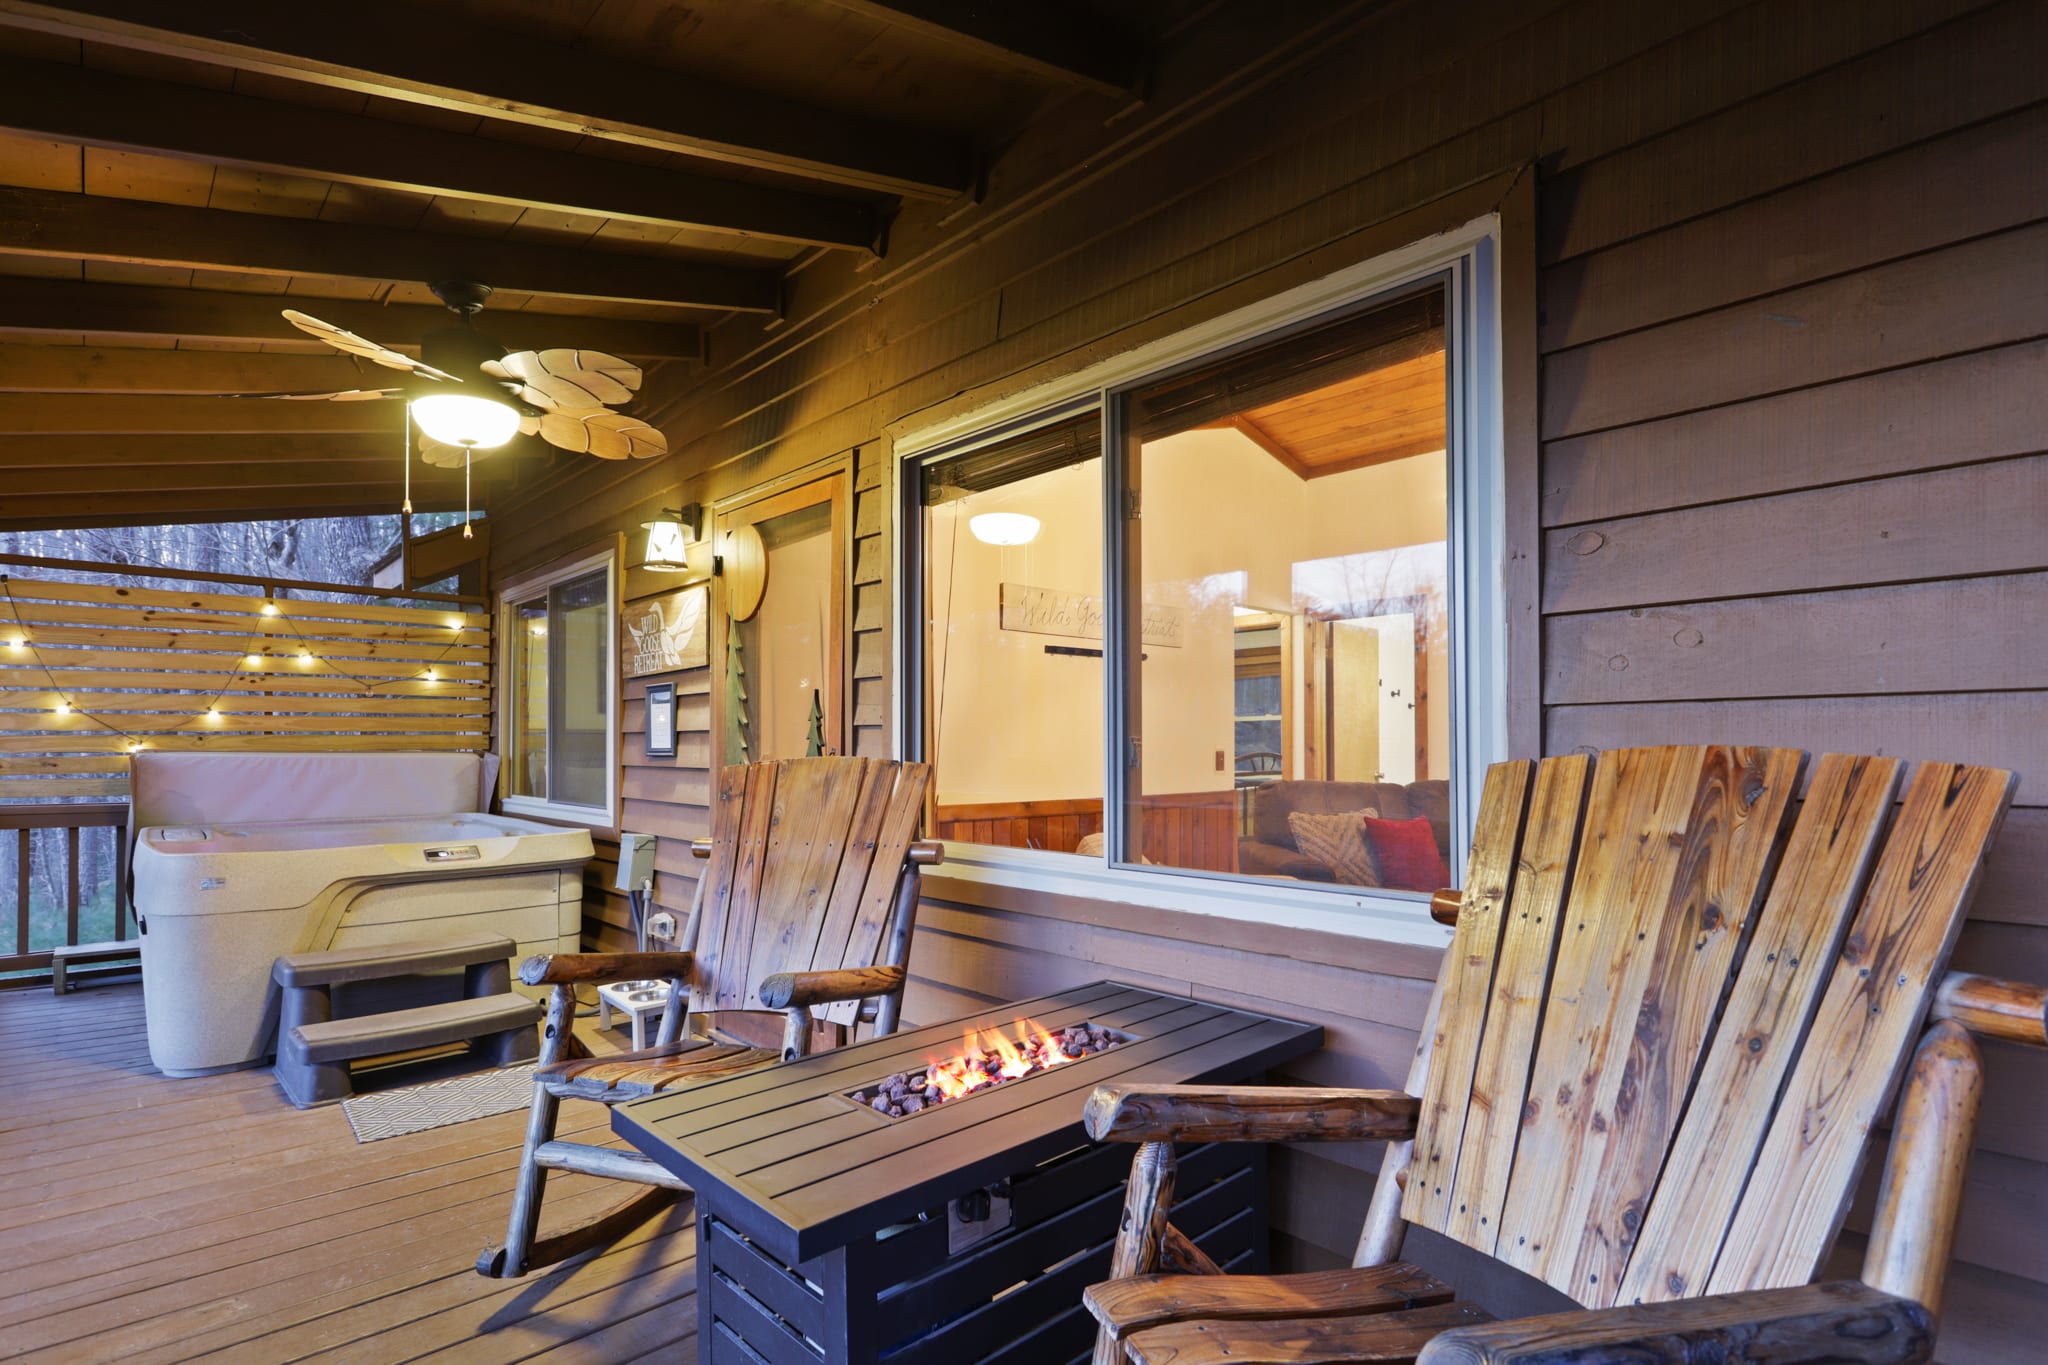 Fire Pit, Seating, and Hot Tub on Deck